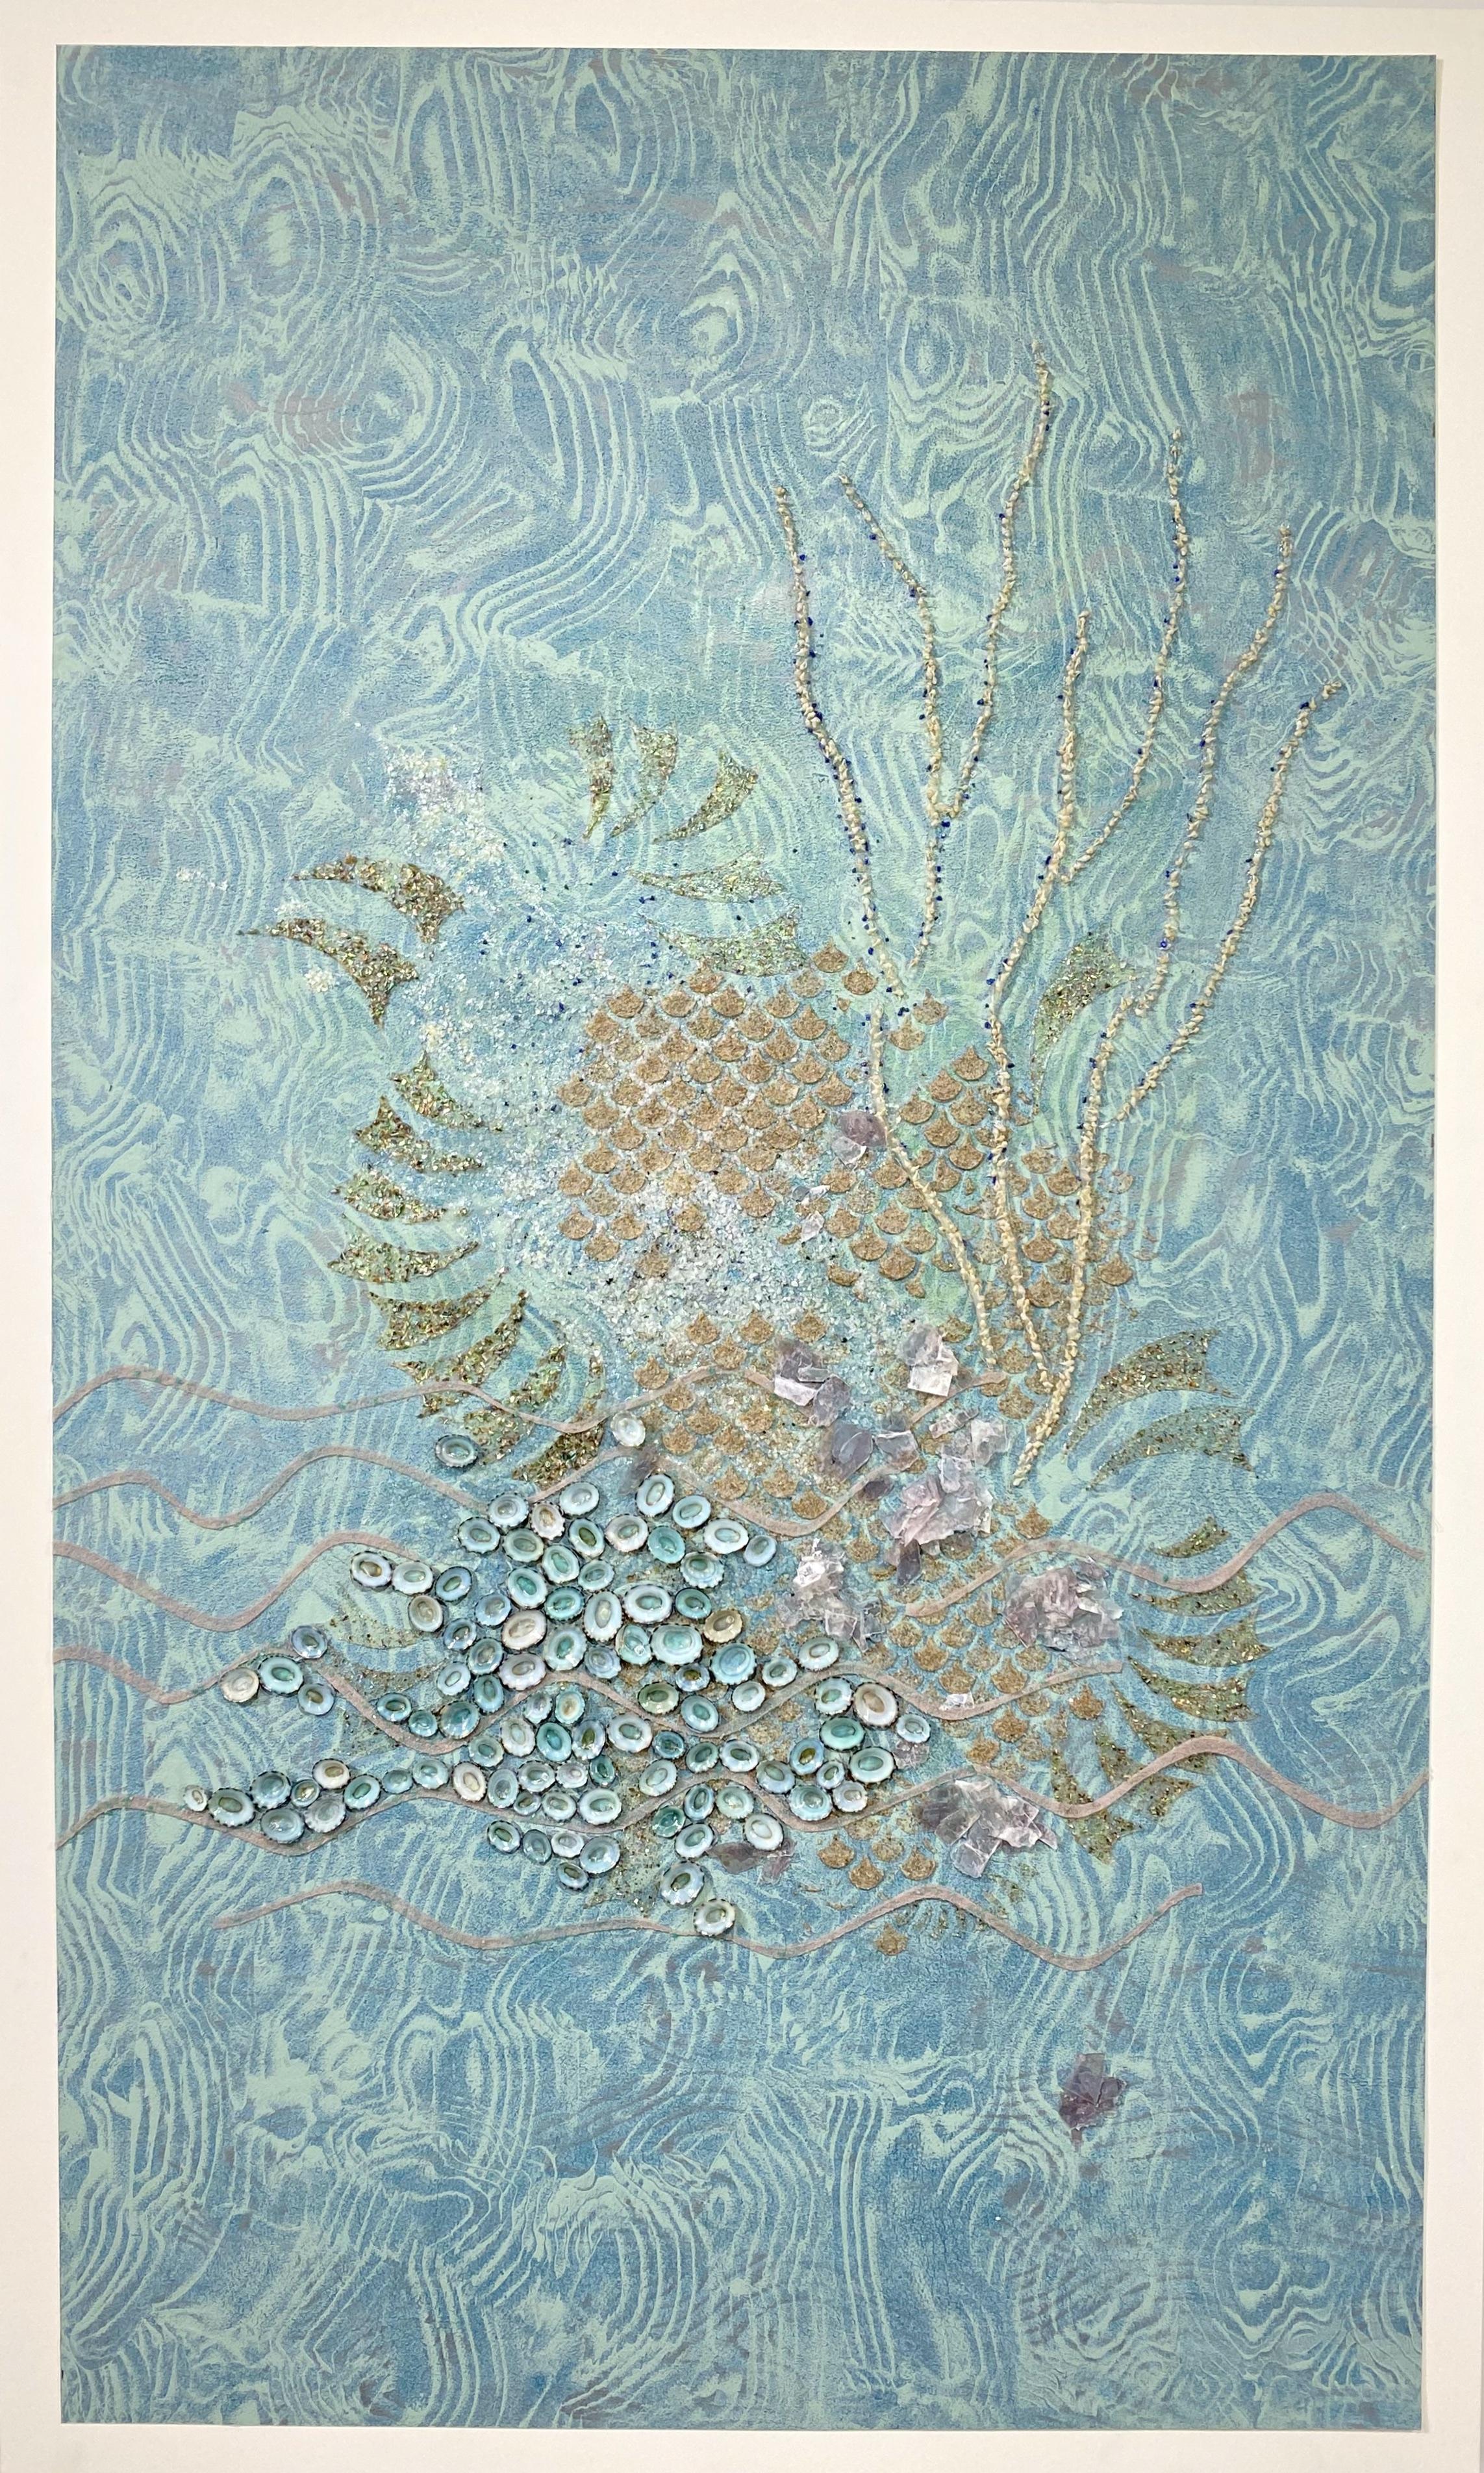 Shallows, Light Blue Abalone, Conch Shell Mixed Media Texture Abstract Pattern